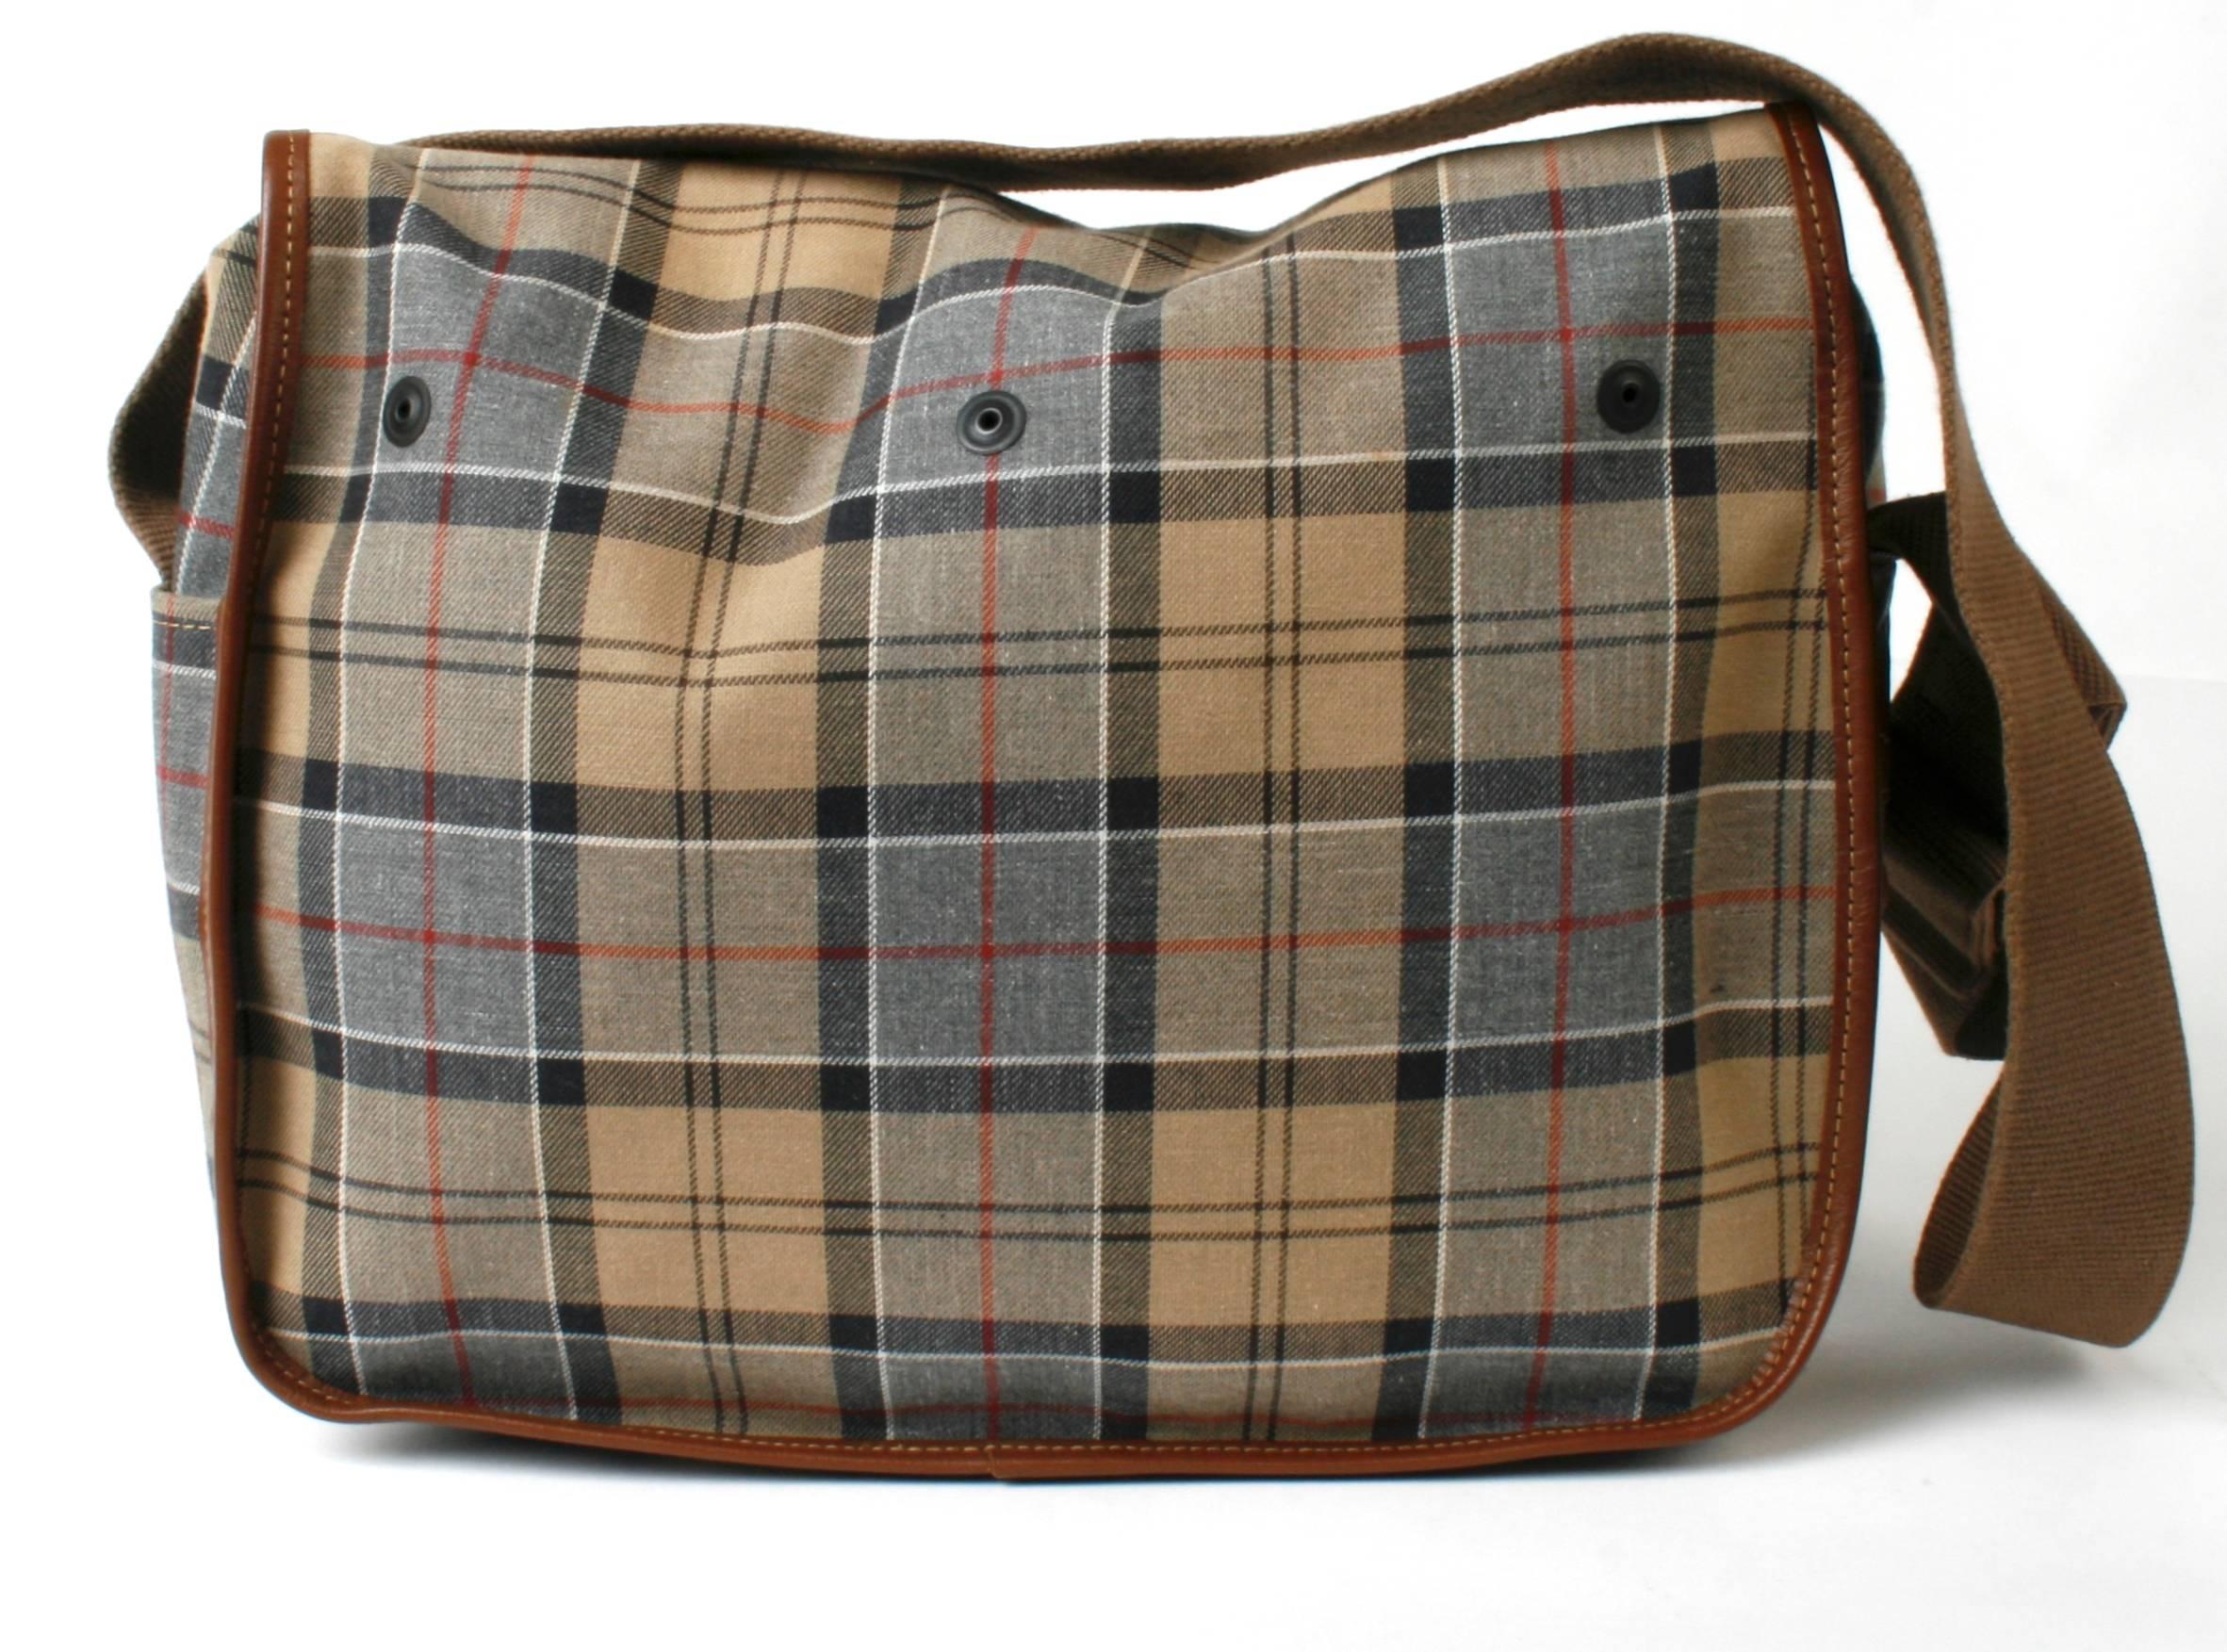 Barbour Medium Tarras bag in Dress Tartan waxed canvas. It is trimmed in brown leather with antique brass buckles and hardware.  Adjustable cotton webbing shoulder strap and two large bellows pockets with signature snaps and grommet holes. The side